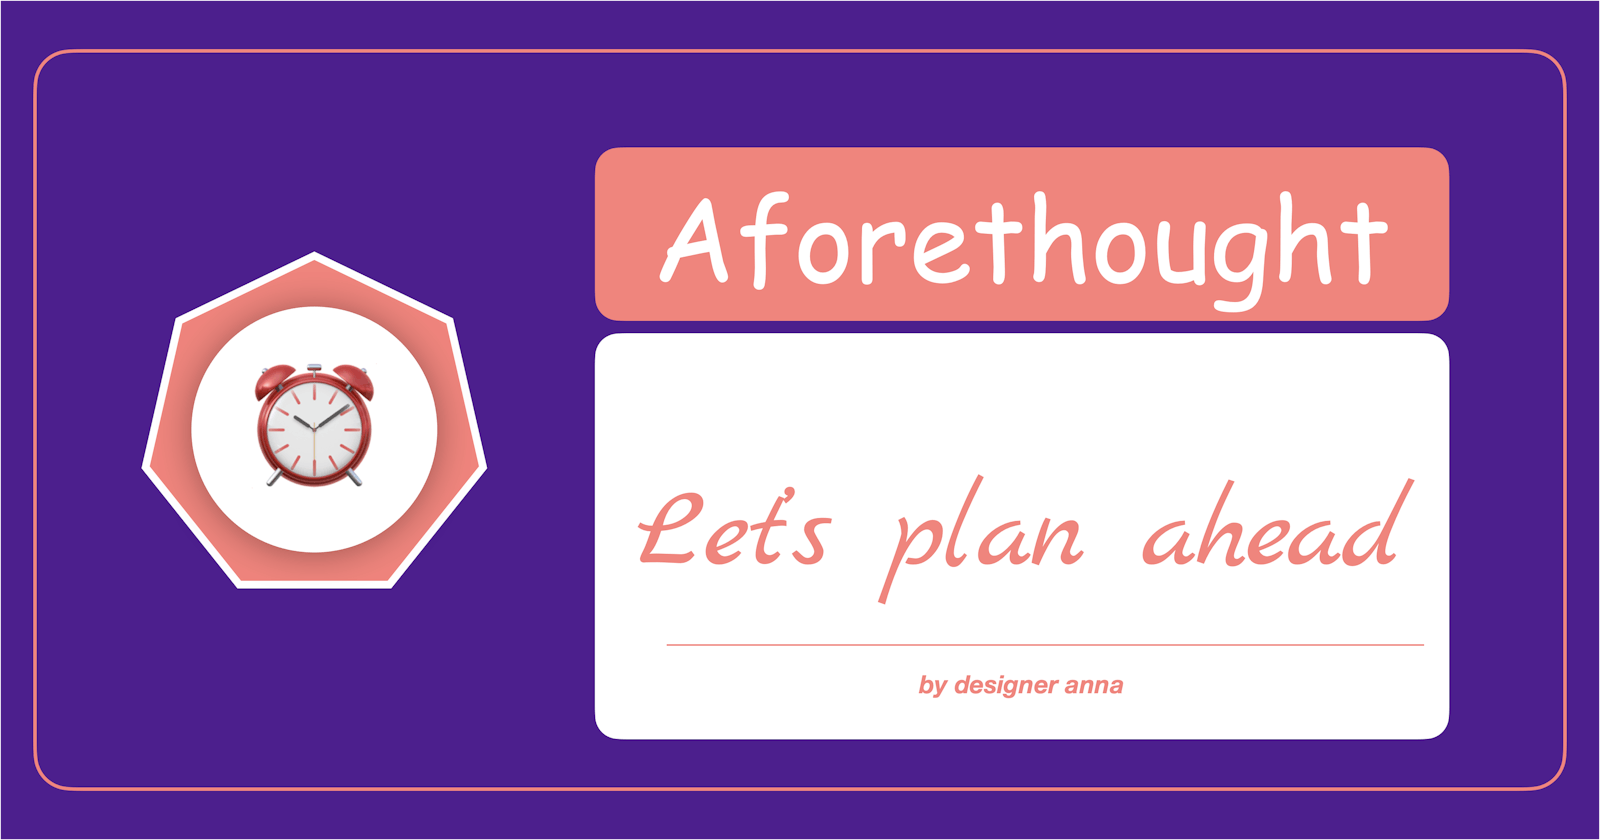 Aforethought - Let's Plan Ahead